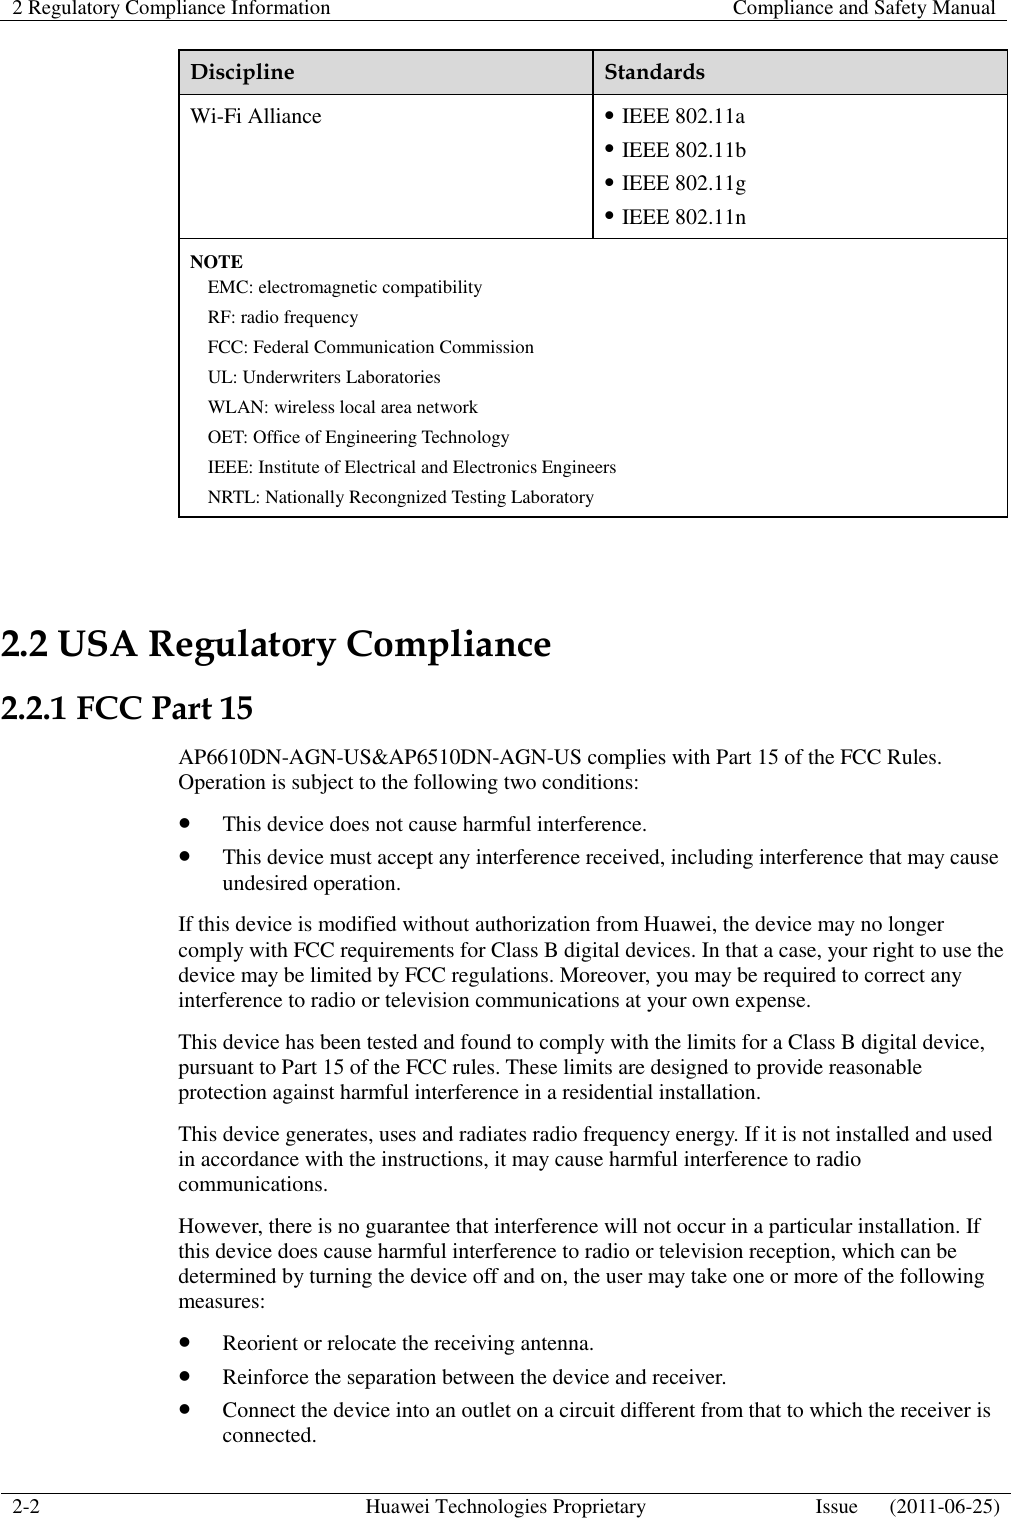 2 Regulatory Compliance Information    Compliance and Safety Manual  2-2 Huawei Technologies Proprietary Issue      (2011-06-25)  Discipline Standards Wi-Fi Alliance  IEEE 802.11a  IEEE 802.11b  IEEE 802.11g  IEEE 802.11n NOTE EMC: electromagnetic compatibility RF: radio frequency FCC: Federal Communication Commission UL: Underwriters Laboratories WLAN: wireless local area network OET: Office of Engineering Technology IEEE: Institute of Electrical and Electronics Engineers NRTL: Nationally Recongnized Testing Laboratory  2.2 USA Regulatory Compliance 2.2.1 FCC Part 15 AP6610DN-AGN-US&amp;AP6510DN-AGN-US complies with Part 15 of the FCC Rules. Operation is subject to the following two conditions:  This device does not cause harmful interference.  This device must accept any interference received, including interference that may cause undesired operation. If this device is modified without authorization from Huawei, the device may no longer comply with FCC requirements for Class B digital devices. In that a case, your right to use the device may be limited by FCC regulations. Moreover, you may be required to correct any interference to radio or television communications at your own expense. This device has been tested and found to comply with the limits for a Class B digital device, pursuant to Part 15 of the FCC rules. These limits are designed to provide reasonable protection against harmful interference in a residential installation. This device generates, uses and radiates radio frequency energy. If it is not installed and used in accordance with the instructions, it may cause harmful interference to radio communications. However, there is no guarantee that interference will not occur in a particular installation. If this device does cause harmful interference to radio or television reception, which can be determined by turning the device off and on, the user may take one or more of the following measures:  Reorient or relocate the receiving antenna.  Reinforce the separation between the device and receiver.  Connect the device into an outlet on a circuit different from that to which the receiver is connected. 